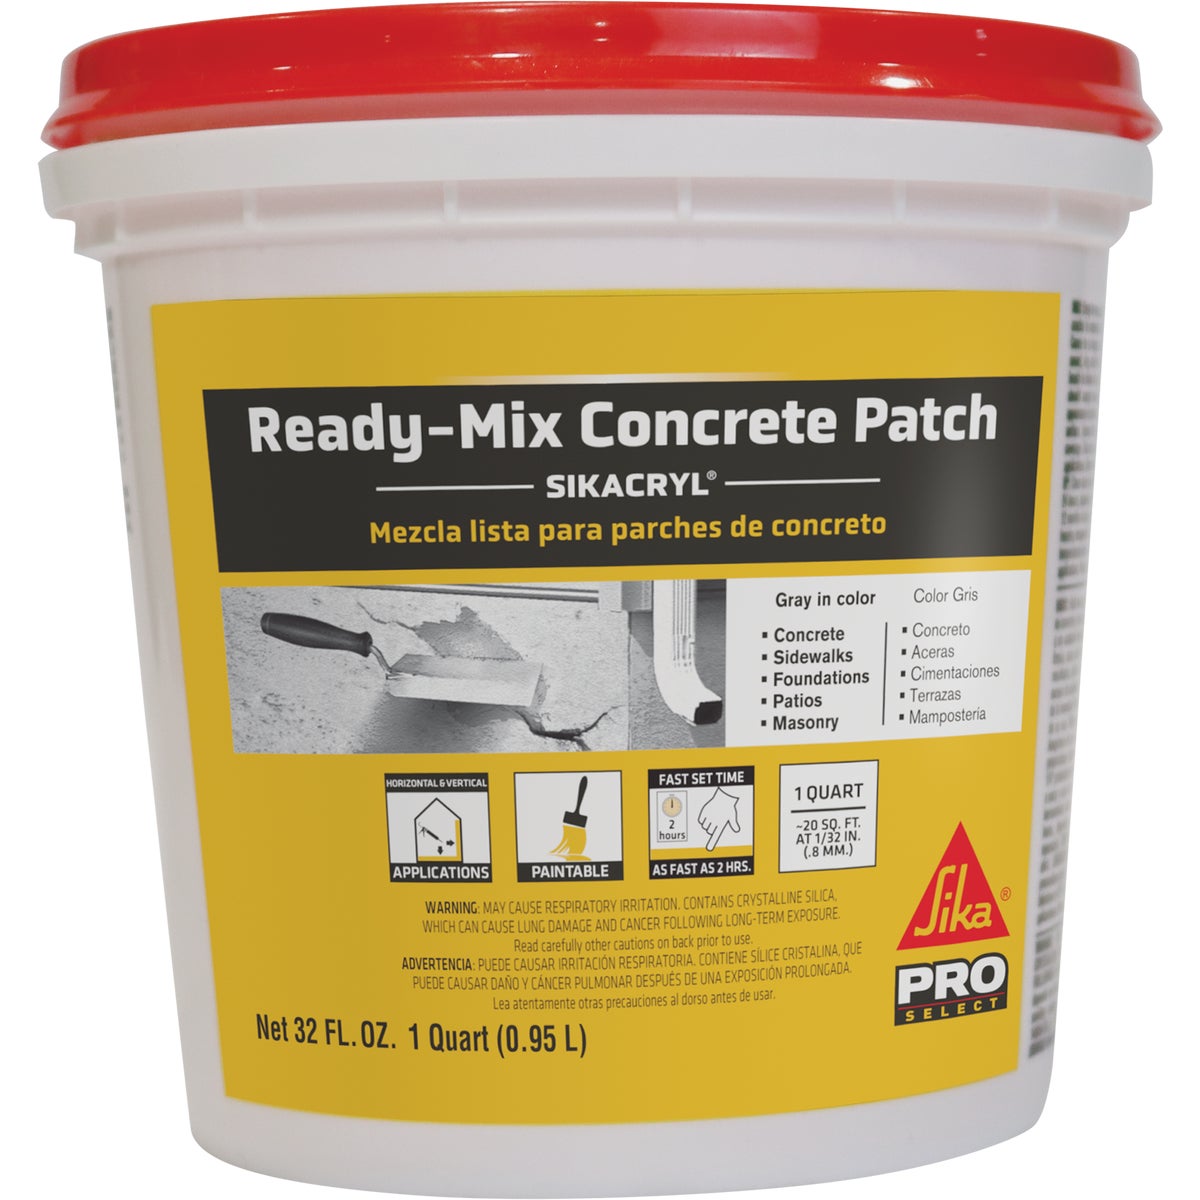 Item 261108, Ready to use, acrylic latex based, textured concrete patch repairs spalls 